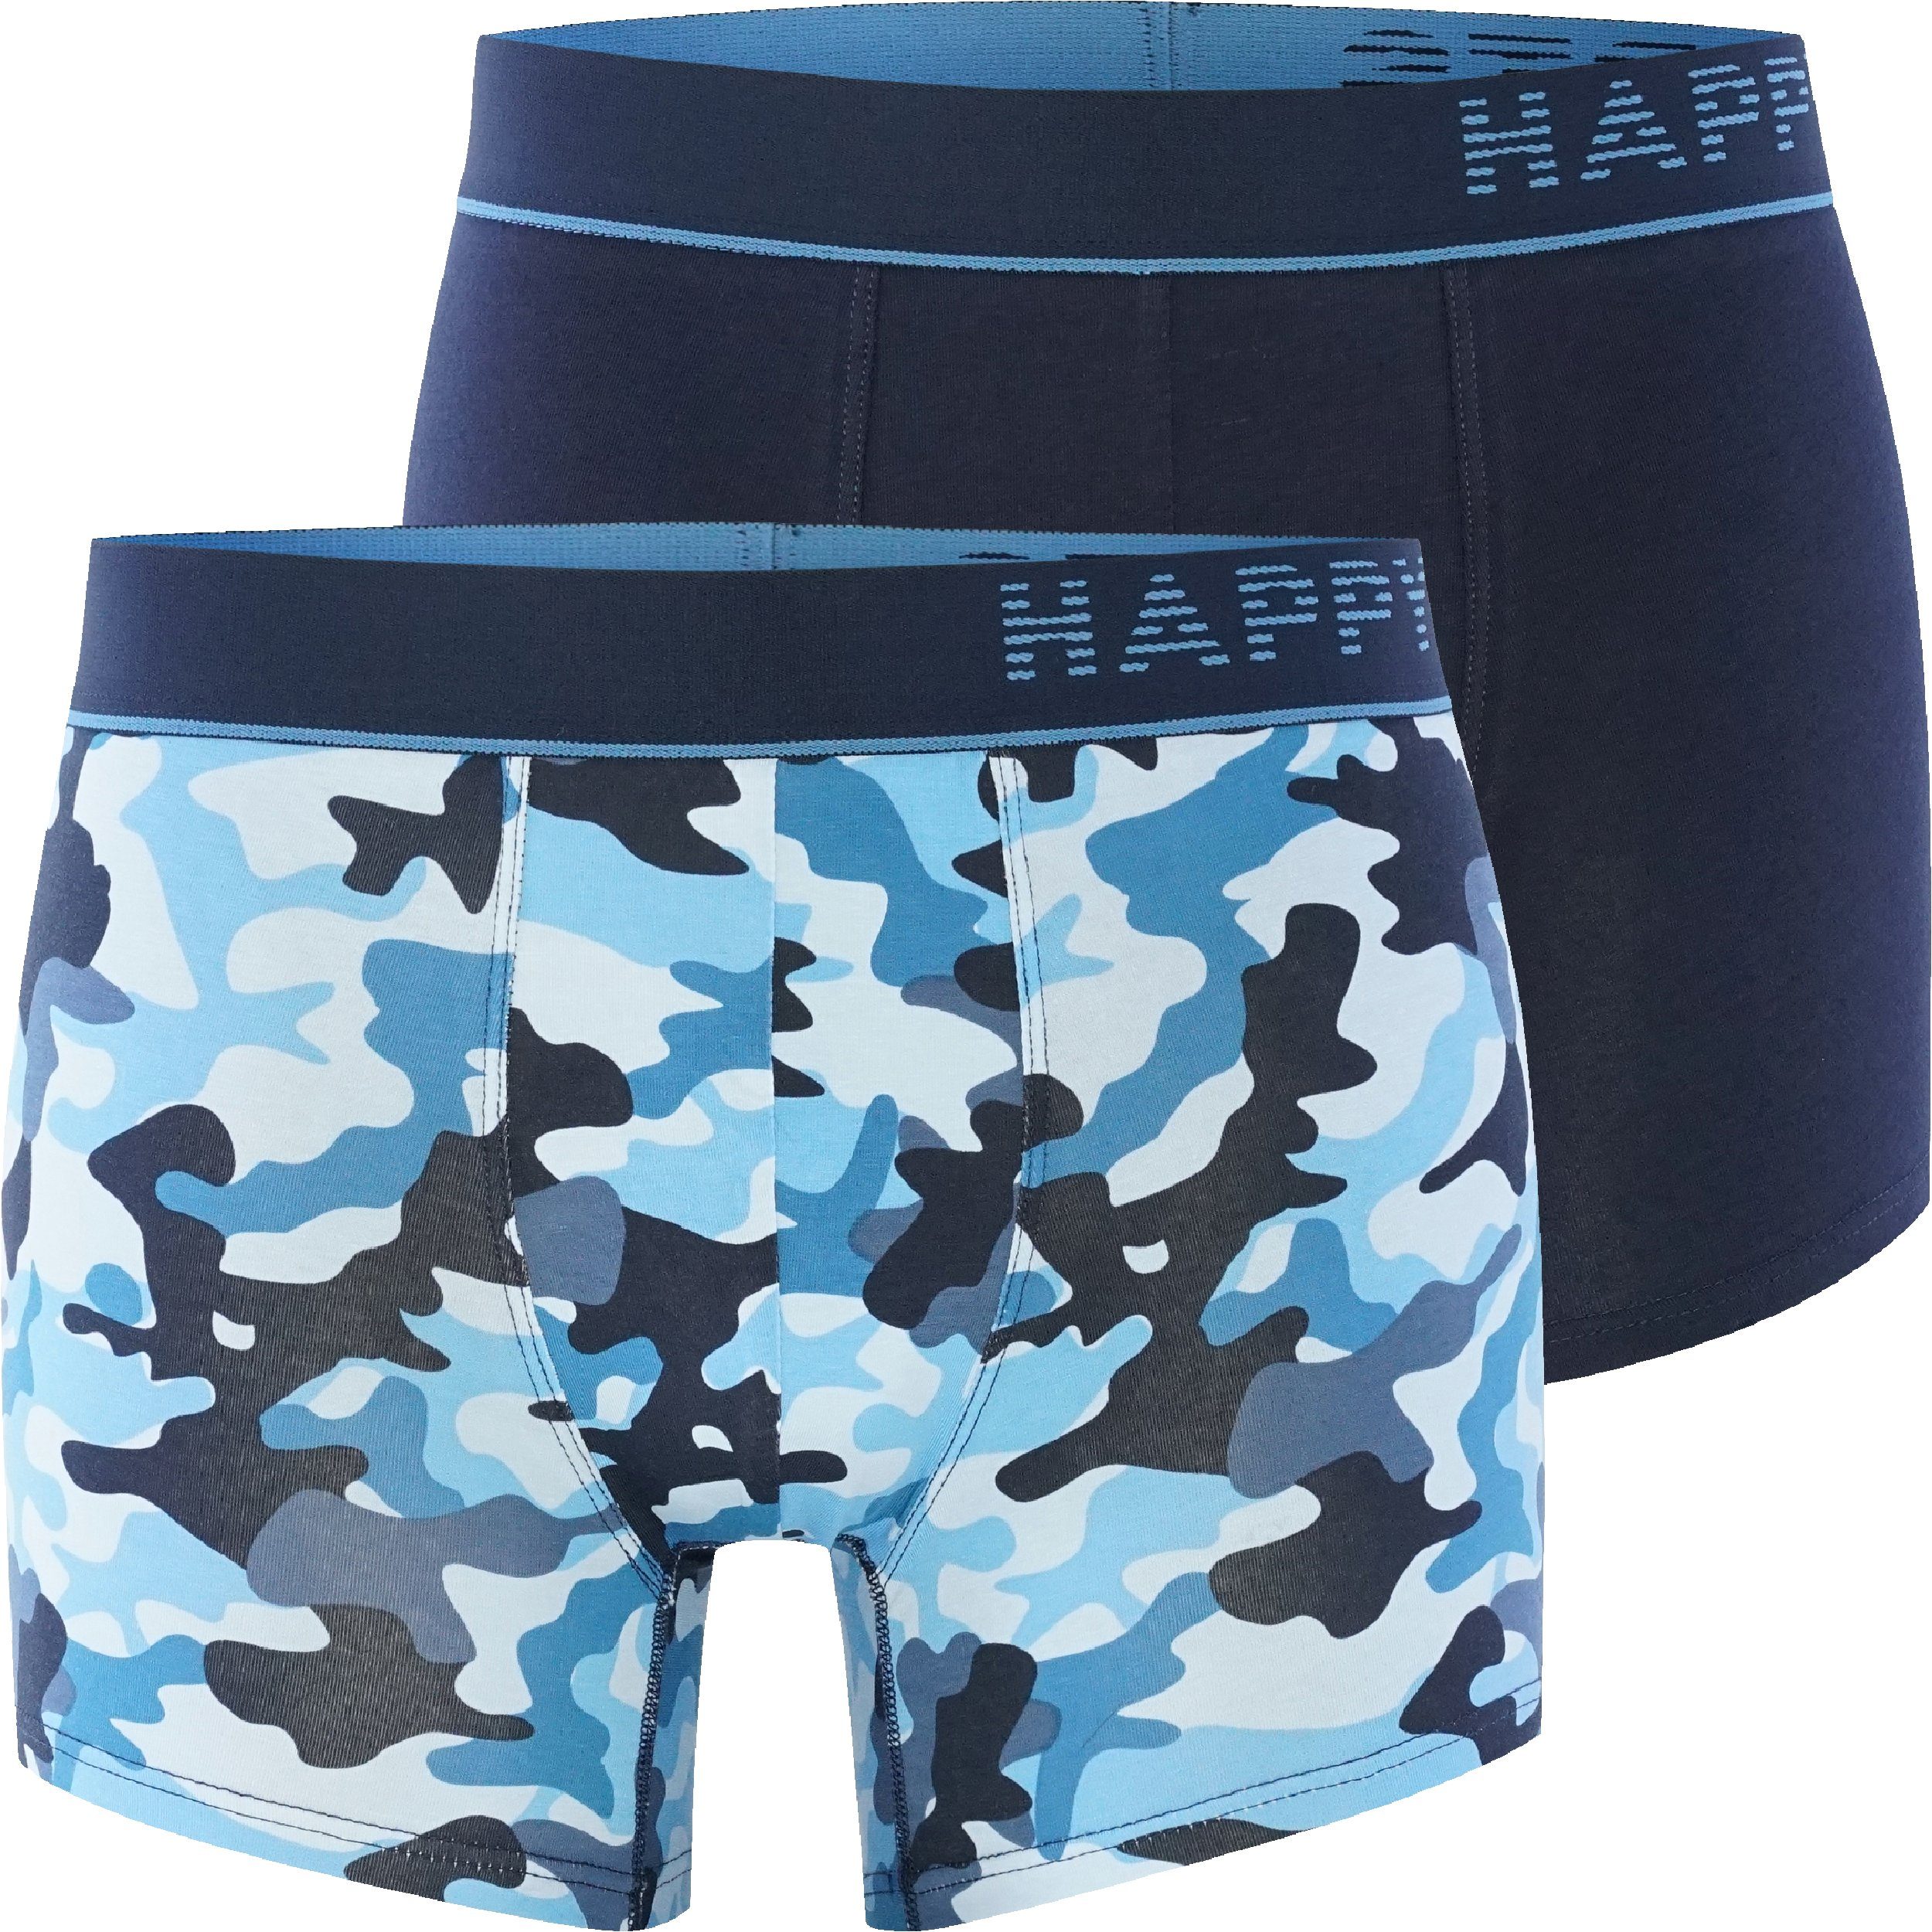 Camouflage HAPPY SHORTS 2-Pack Retro Pants